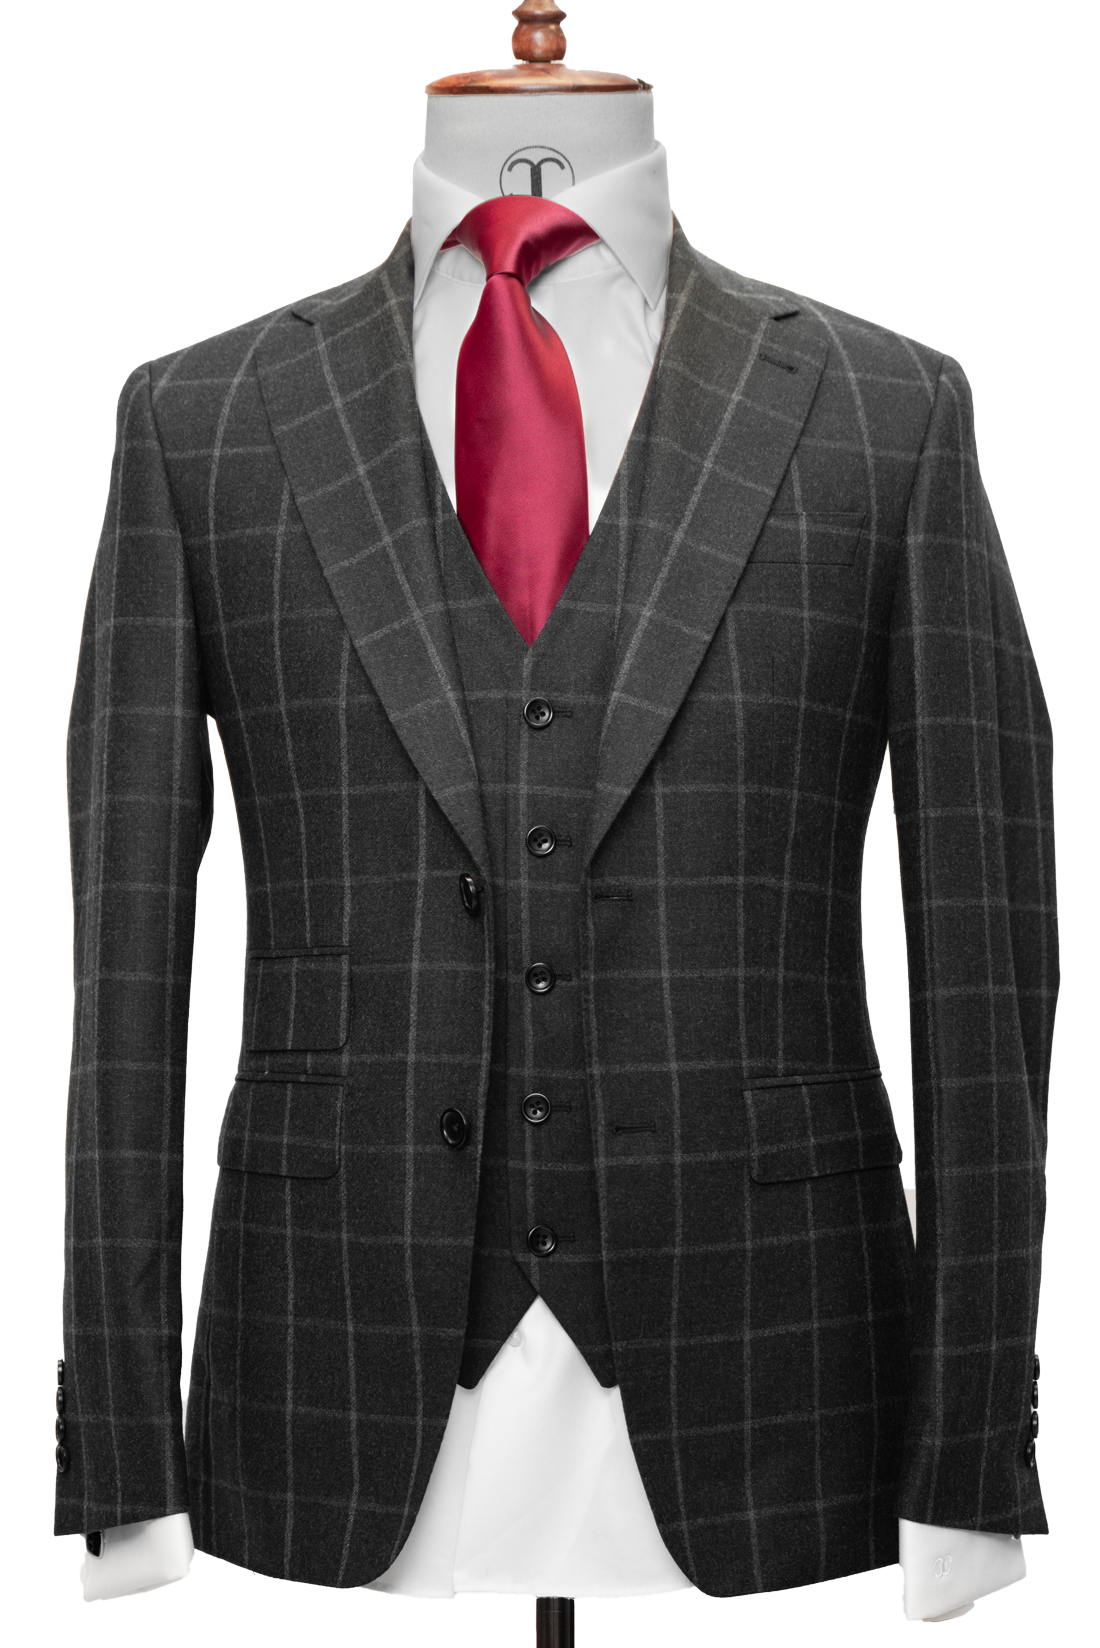 Zignone - Charcoal grey with chalk windowpane cashmere 3-piece slim fit suit